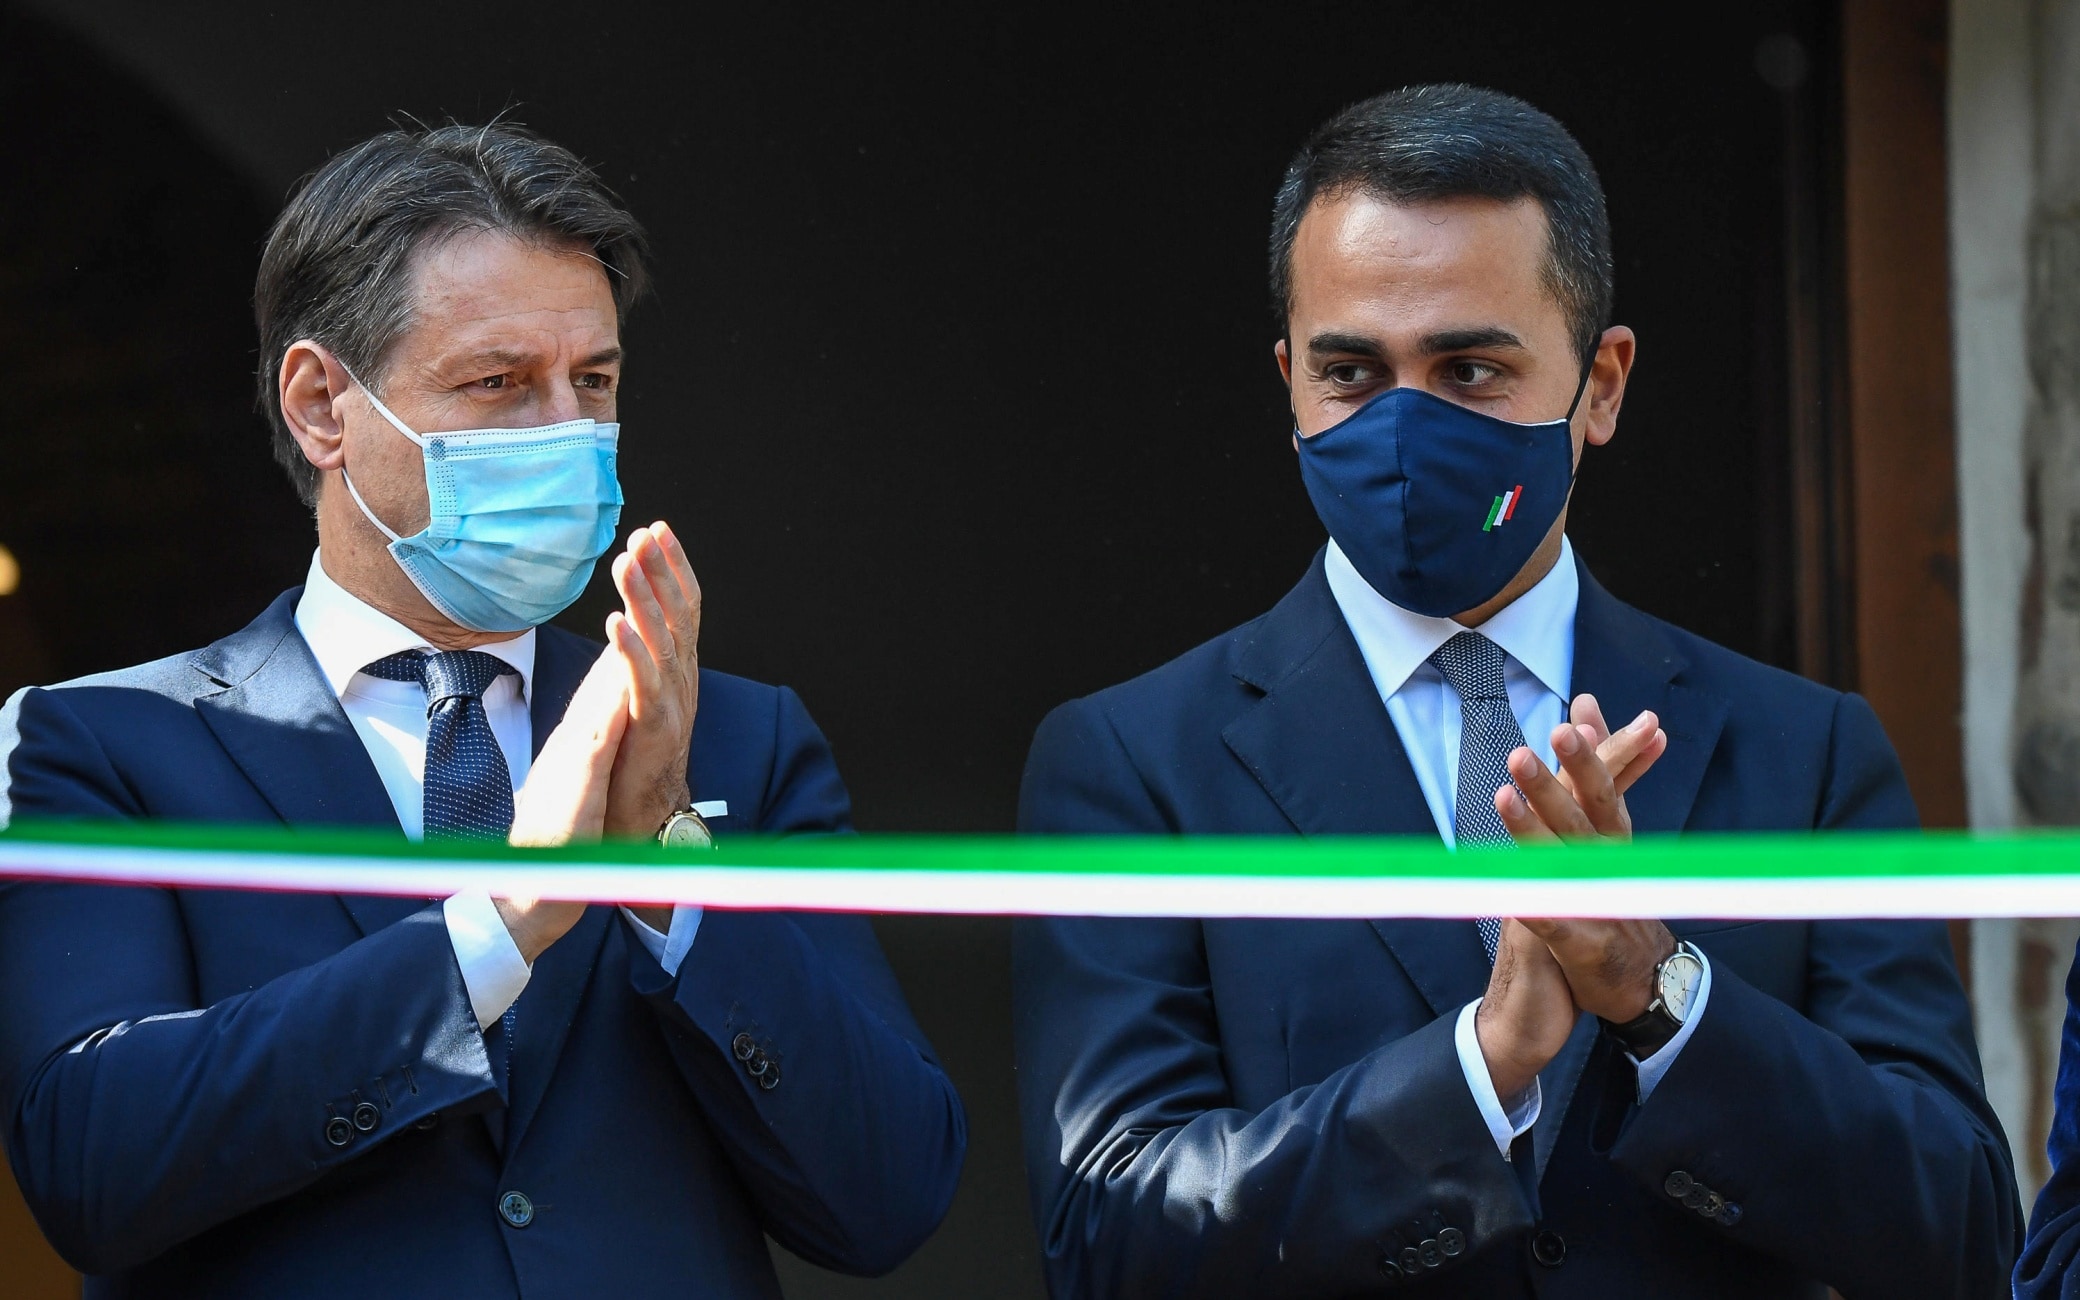 M5S, Conte against Di Maio: “He will have to account for the serious conduct”